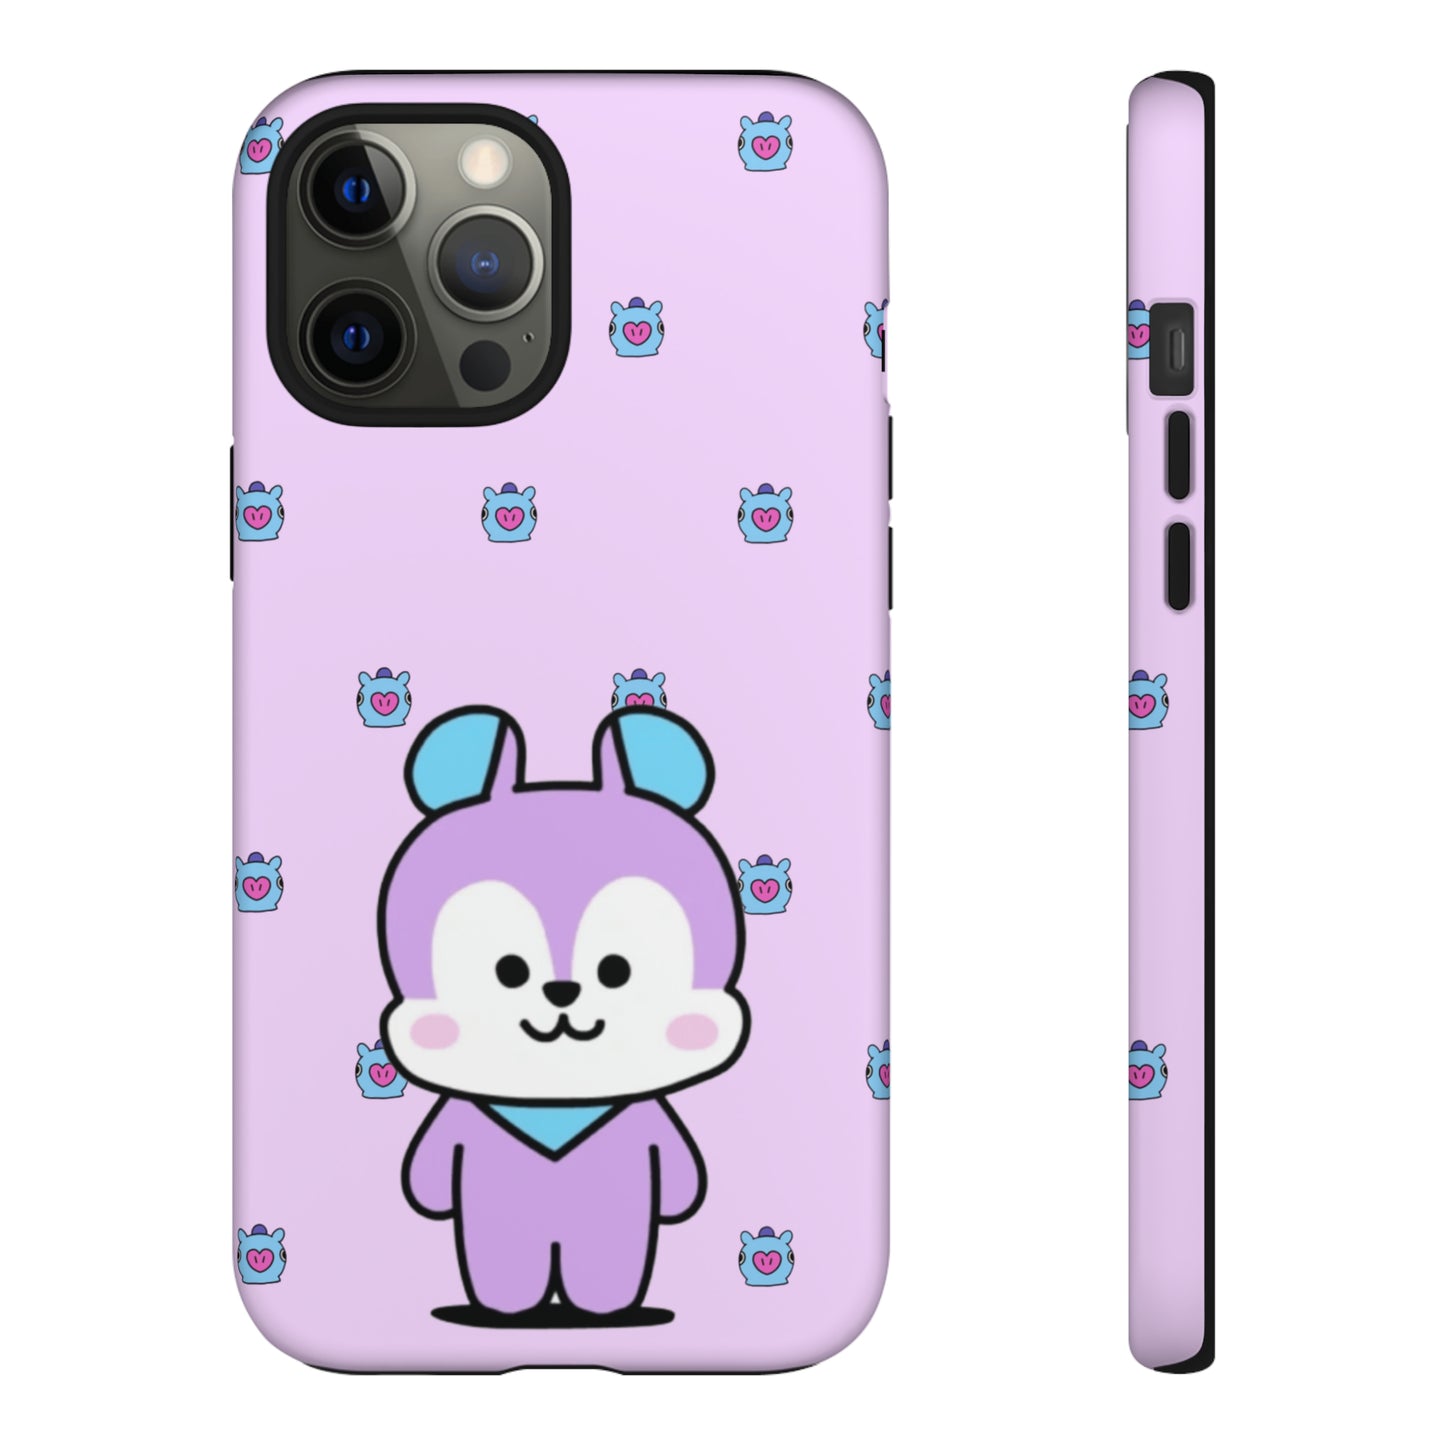 Mang Iphone Case